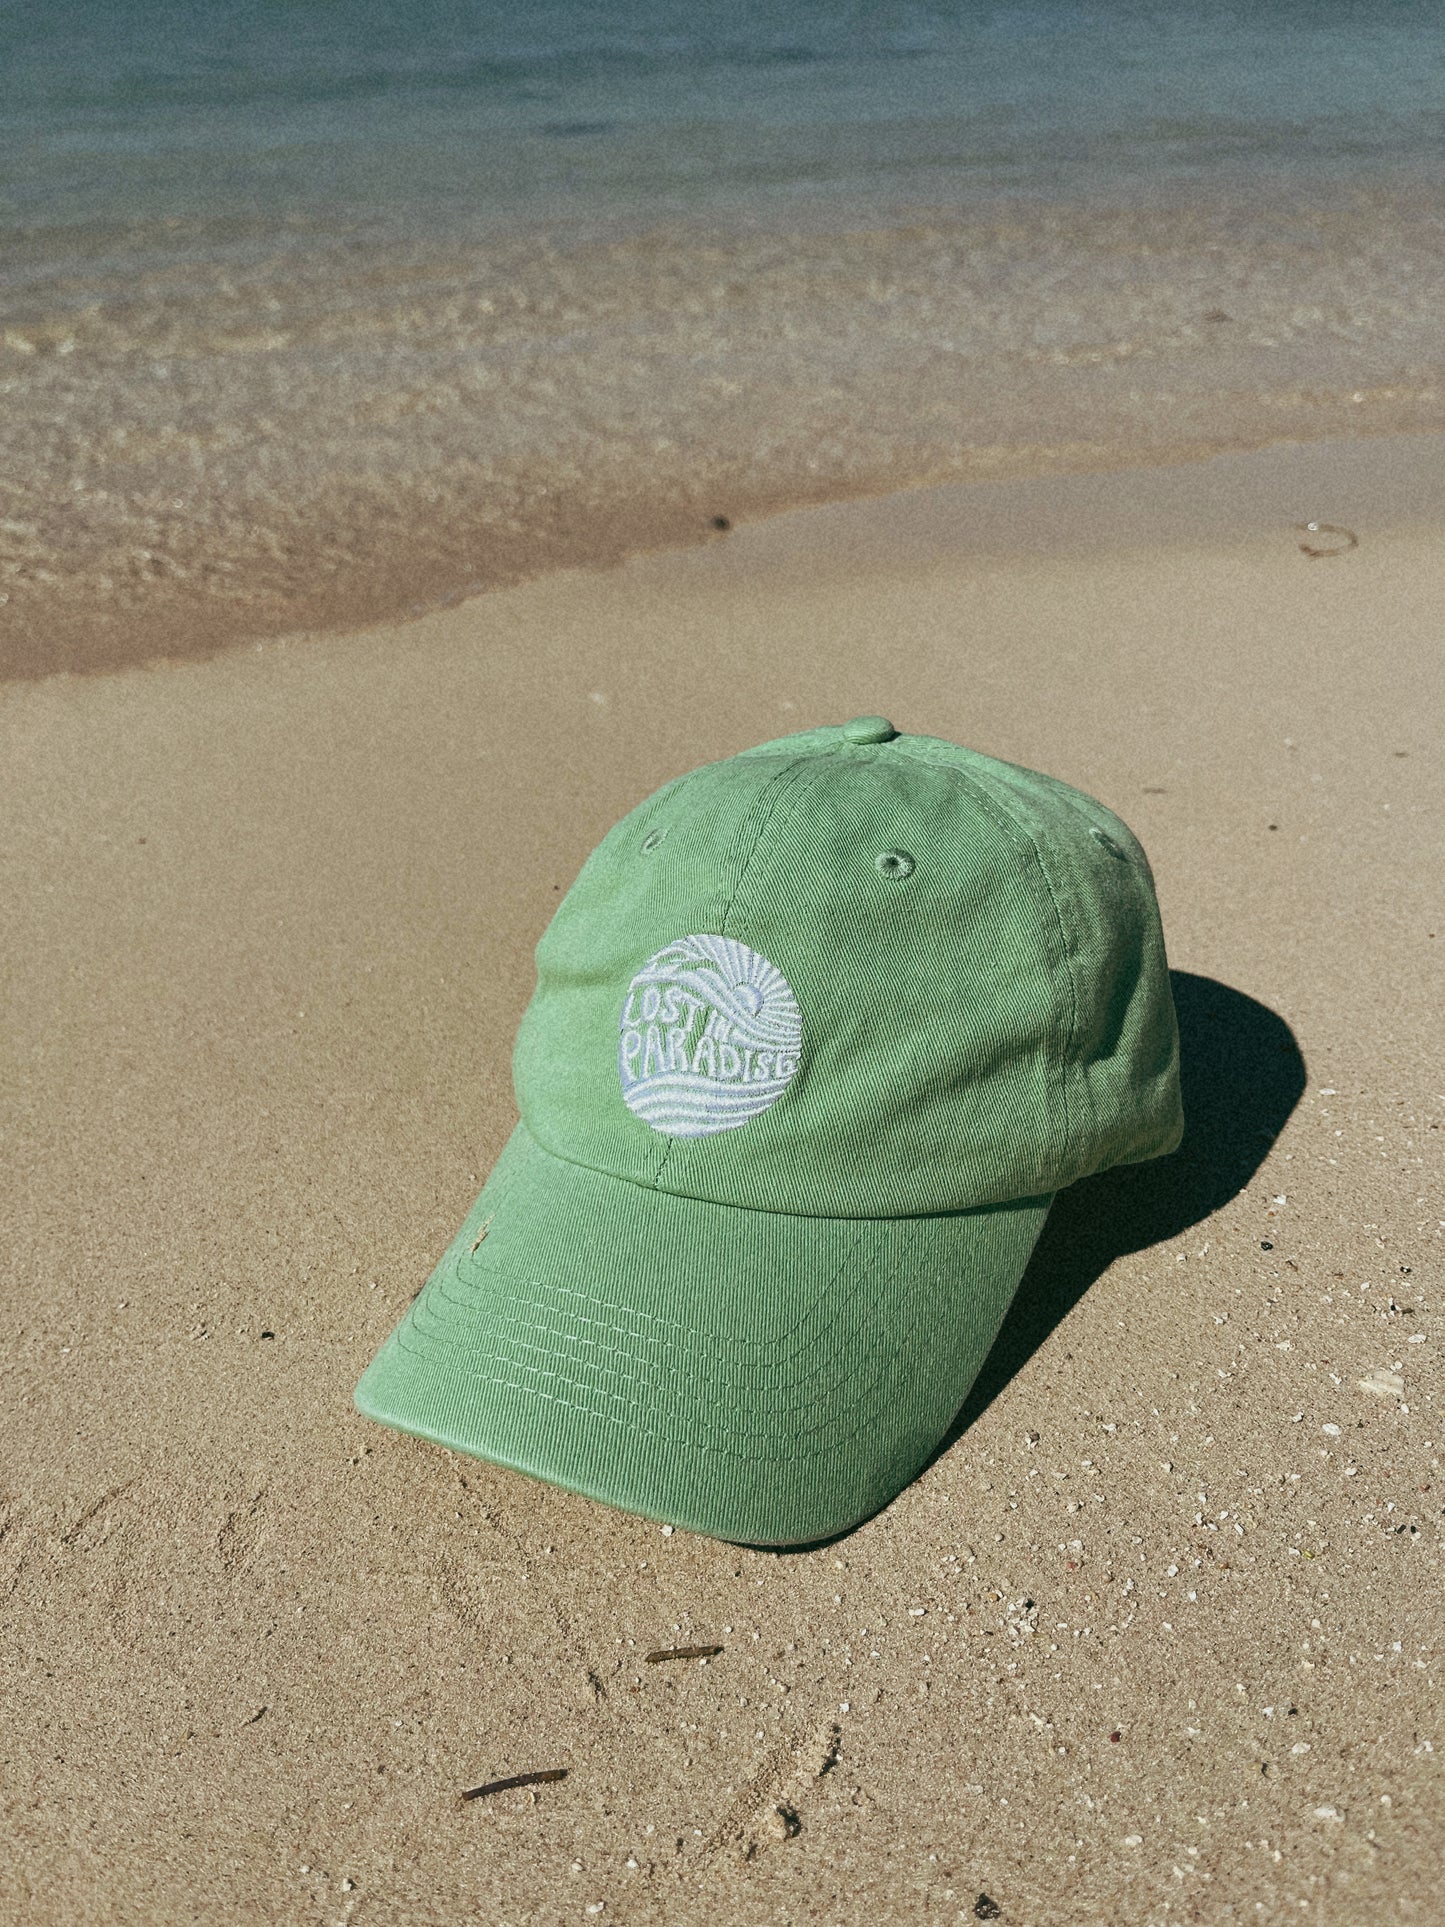 Lost in Paradise Green Dad Hat